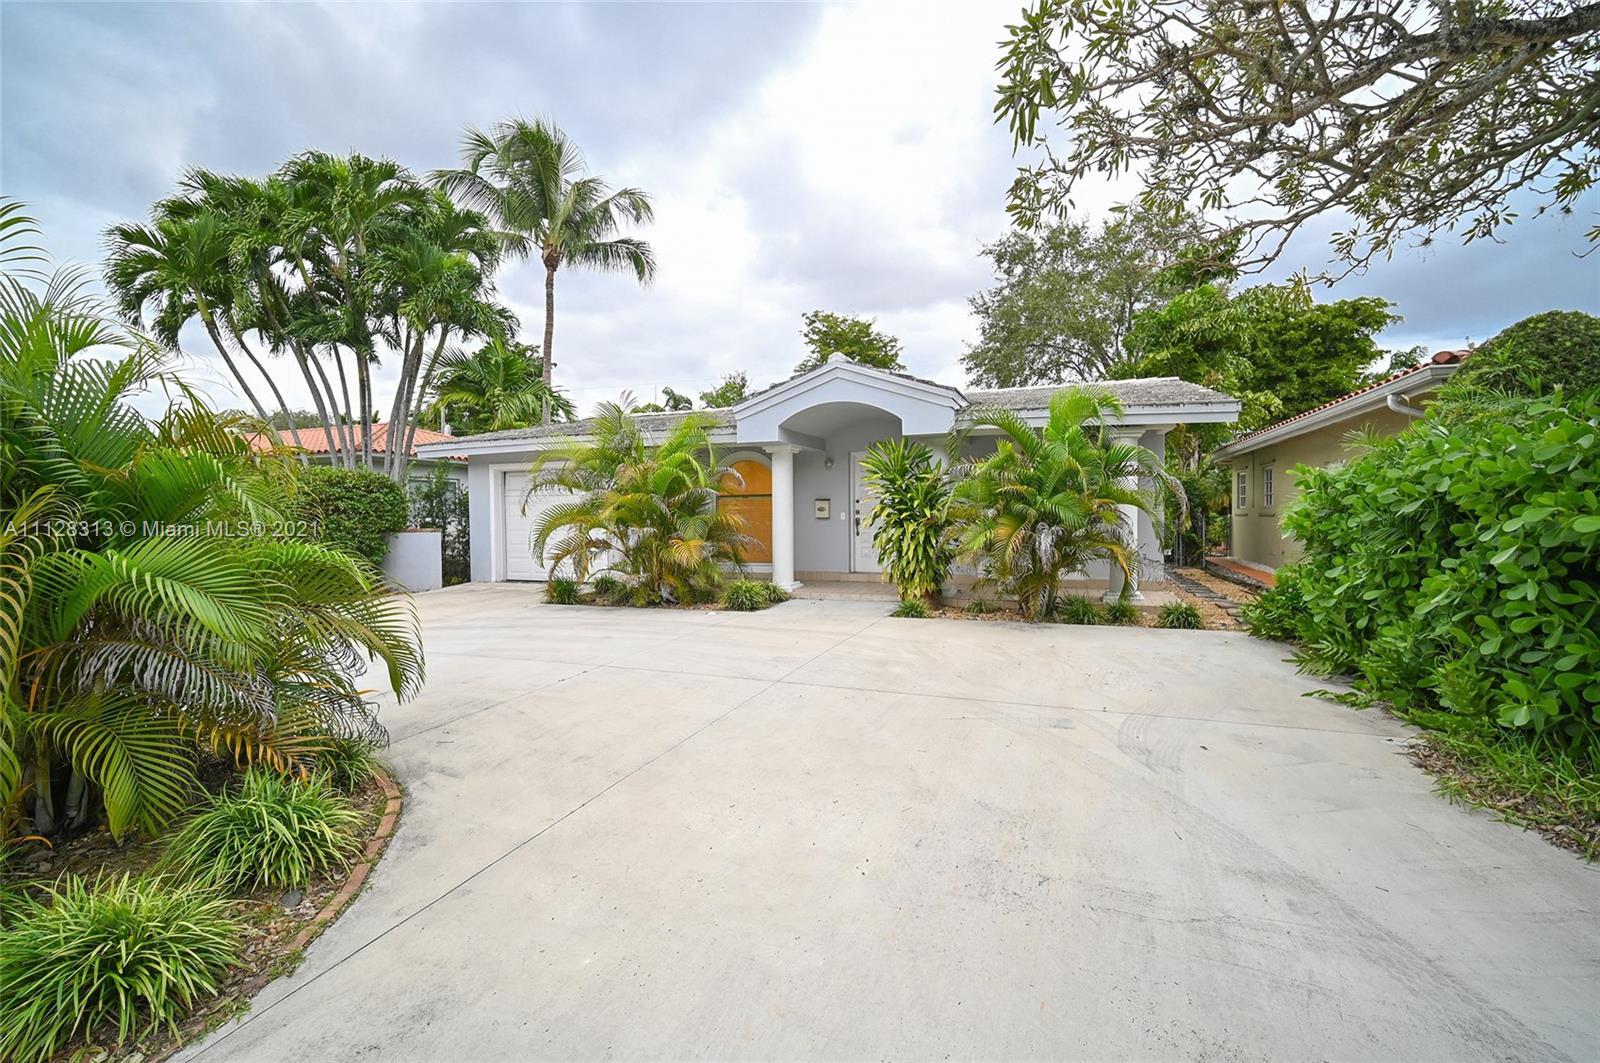 Great Coral Gables home, right on Bird Road with accesibility to all  many majors intersection.   The house has high impact window throughout it,  a fenced patio with room for a pool , and  A/C and all  appliances 1.5 yrs old. Roof its 8 yrs old . The house has tankless water heater, new garage door, recess lighting on the ceilings, and a lot of window to add a lot of clarity. Spacious rooms and updated bathrooms with shower enclosures. The house has a garage for a car with a 5 car driveway.  It also has an sprinkle system.